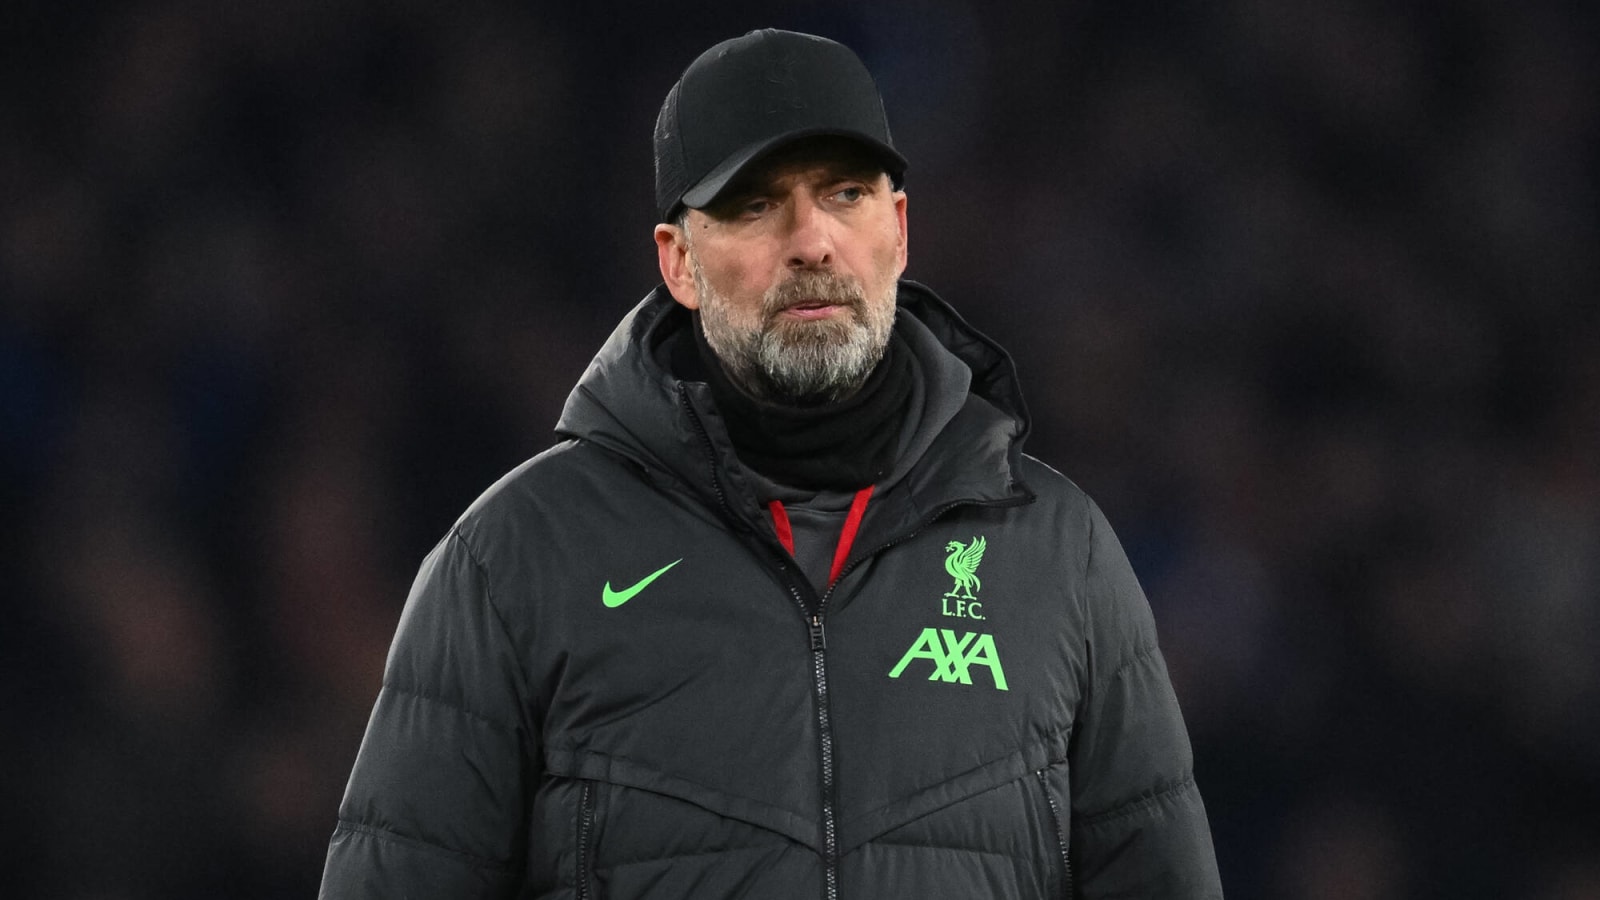 ‘Gutted’ Jurgen Klopp issues heartfelt apology to fans after Liverpool’s poor 2-0 loss to Everton at business end of the tournament